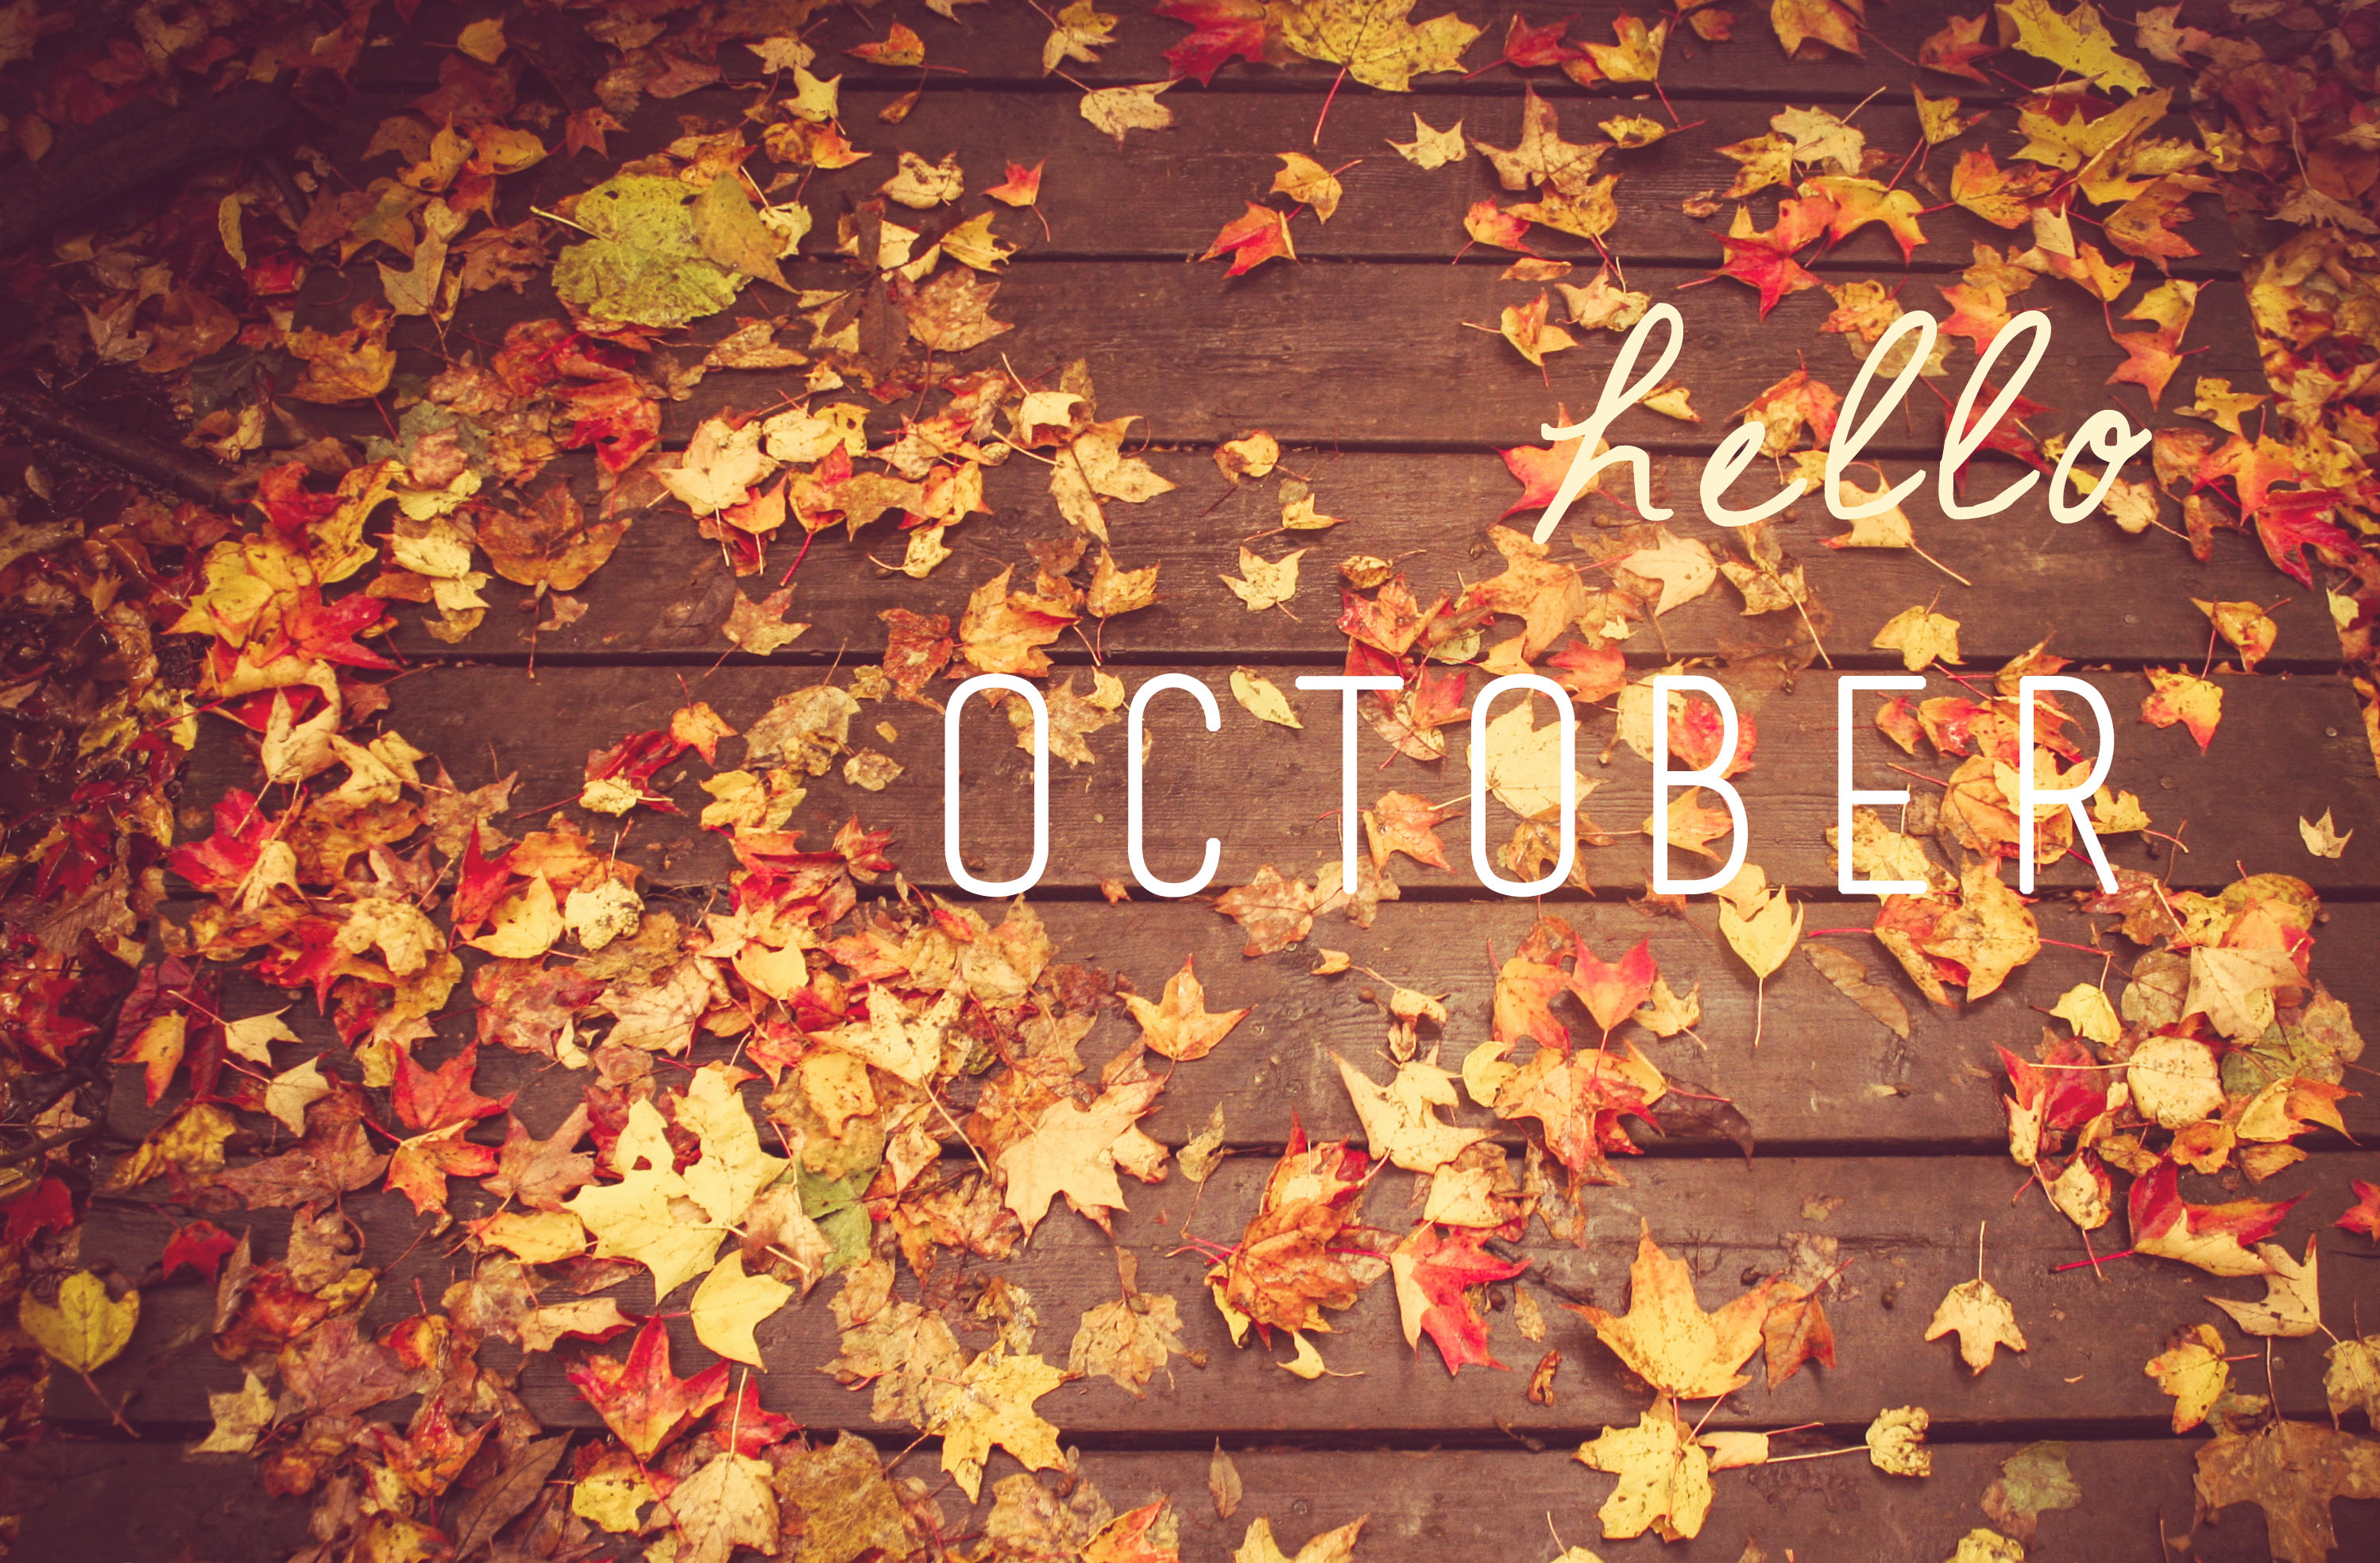 October Quotes Welcome October 10 Sayings to Celebrate the Month